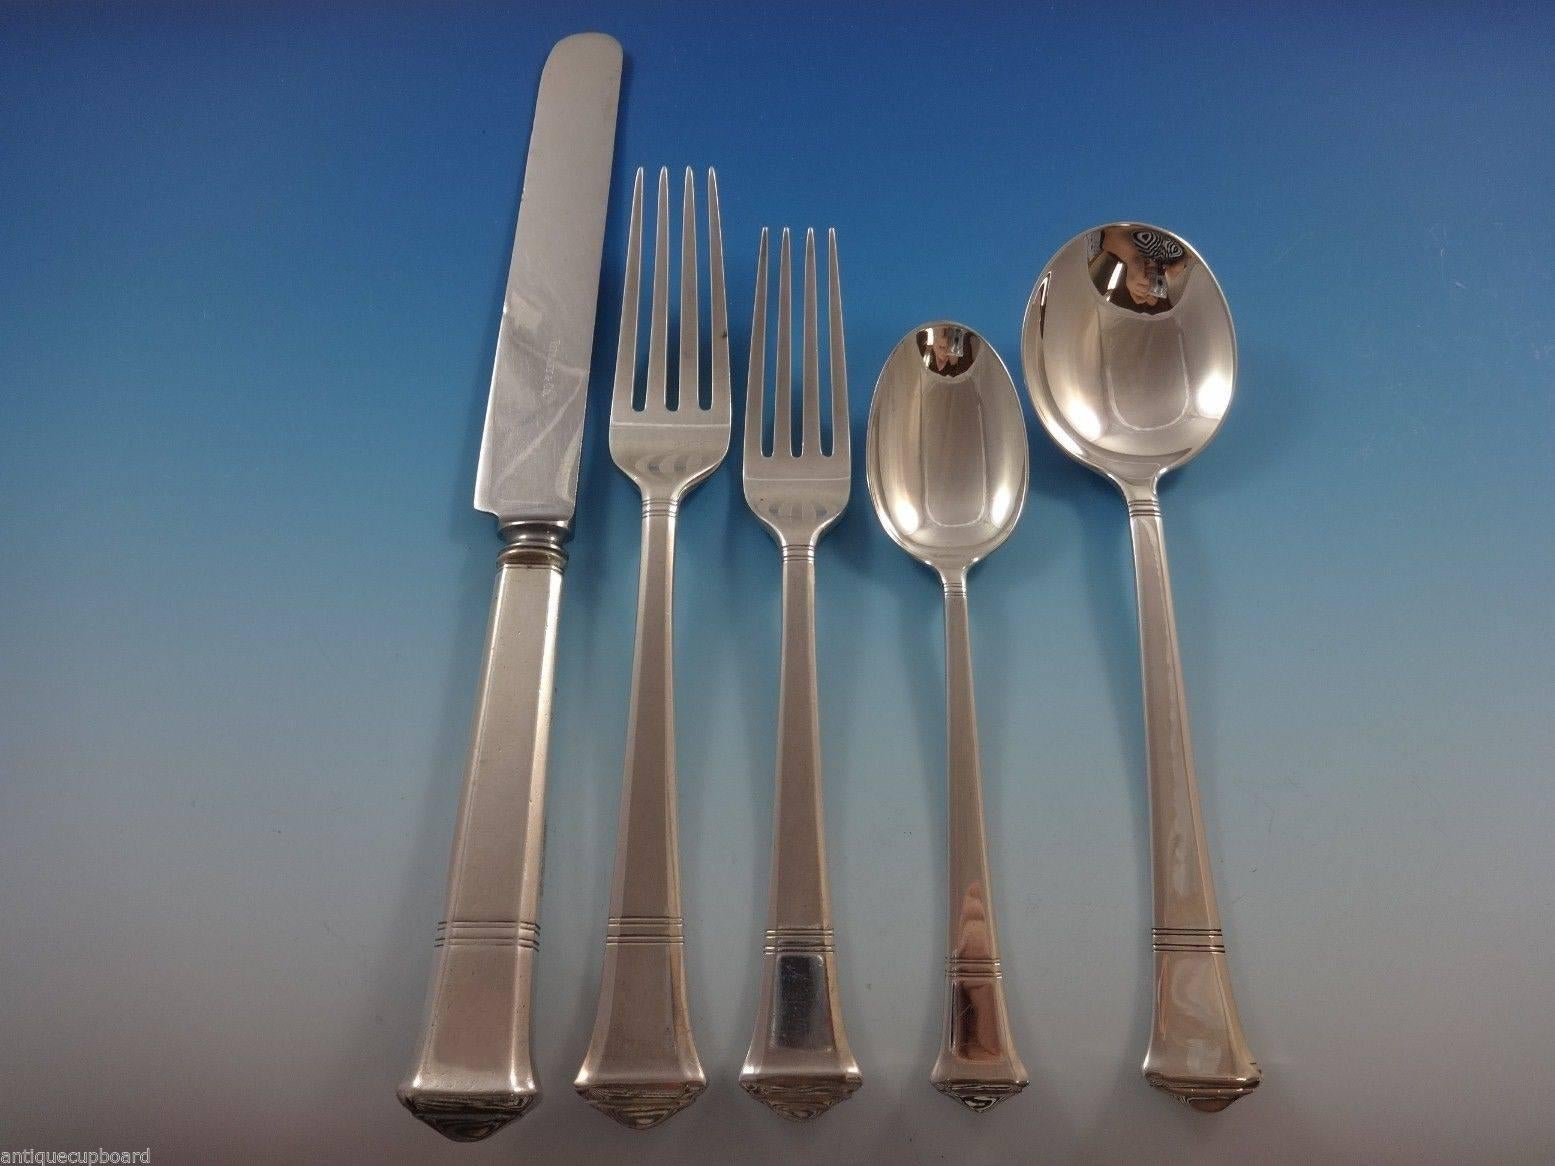 Designed with an eye for balance and proportion, each piece of Tiffany & Co. flatware is a masterpiece of form and function.

Windham by Tiffany & Co. sterling silver dinner flatware set of 63 pieces. This set includes:

12 dinner size knives,